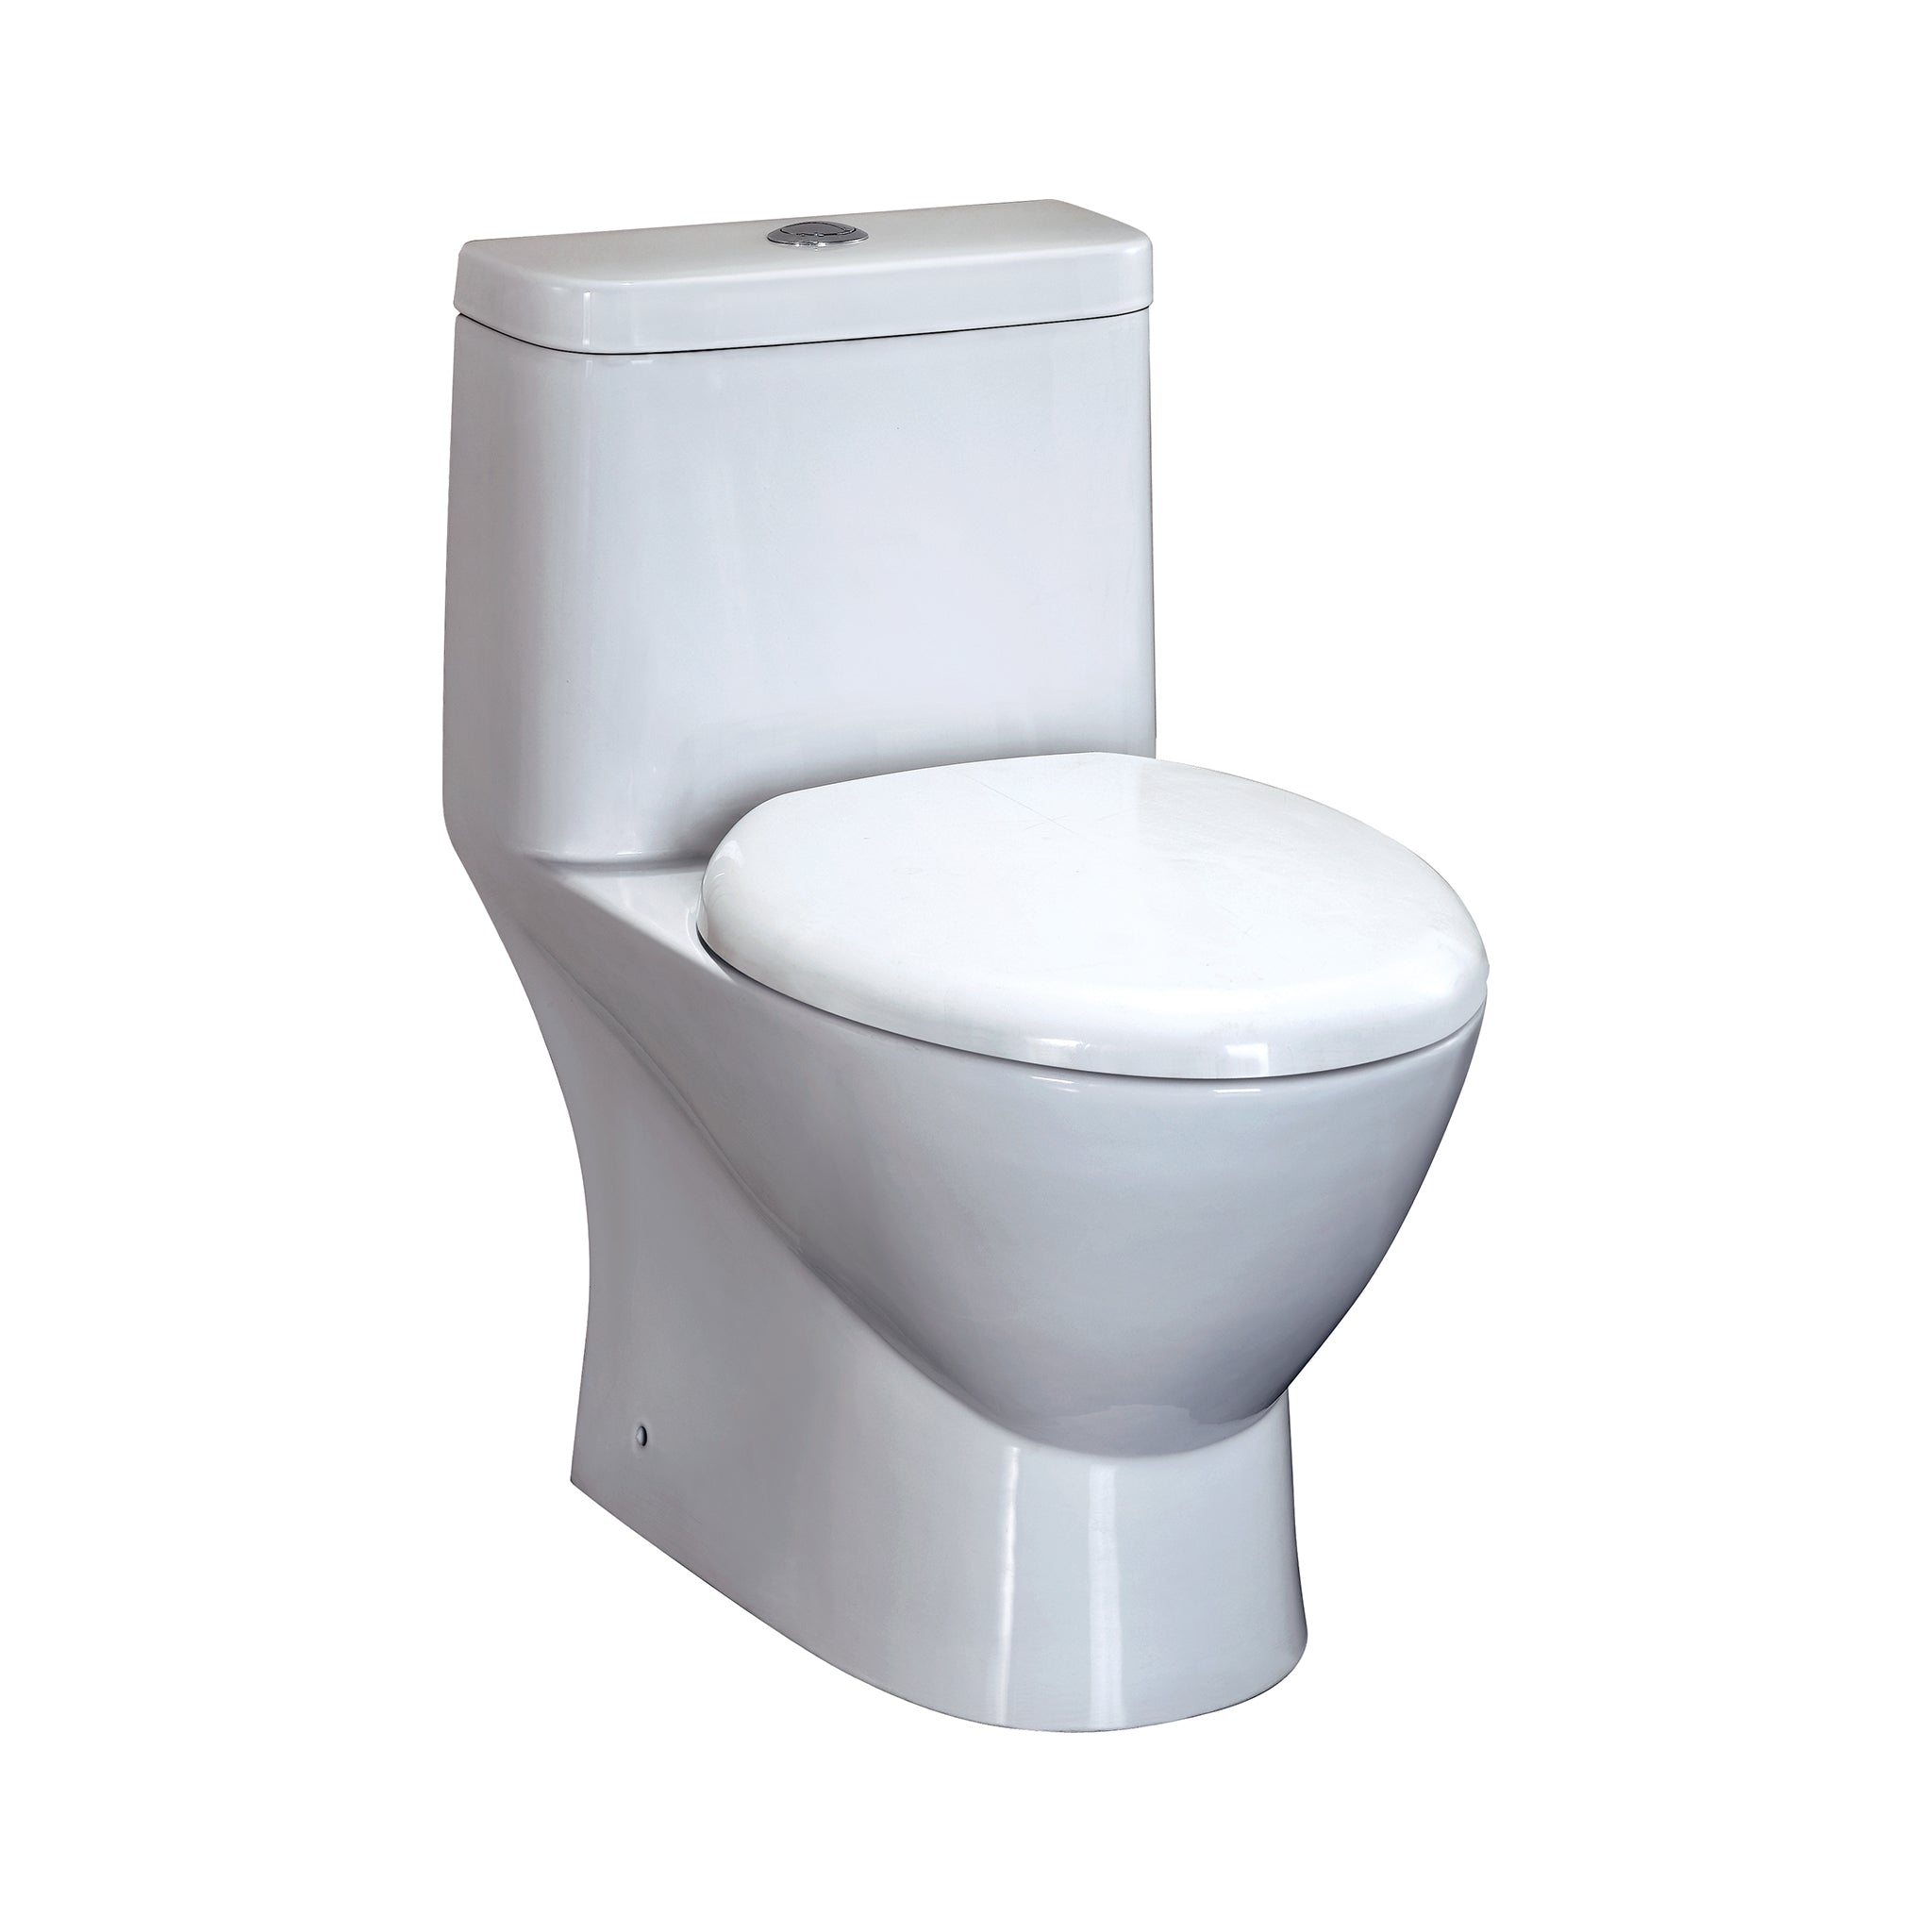 Eago TB 346 Elongated One Piece Dual Flush Toilet With Soft Closing Seat